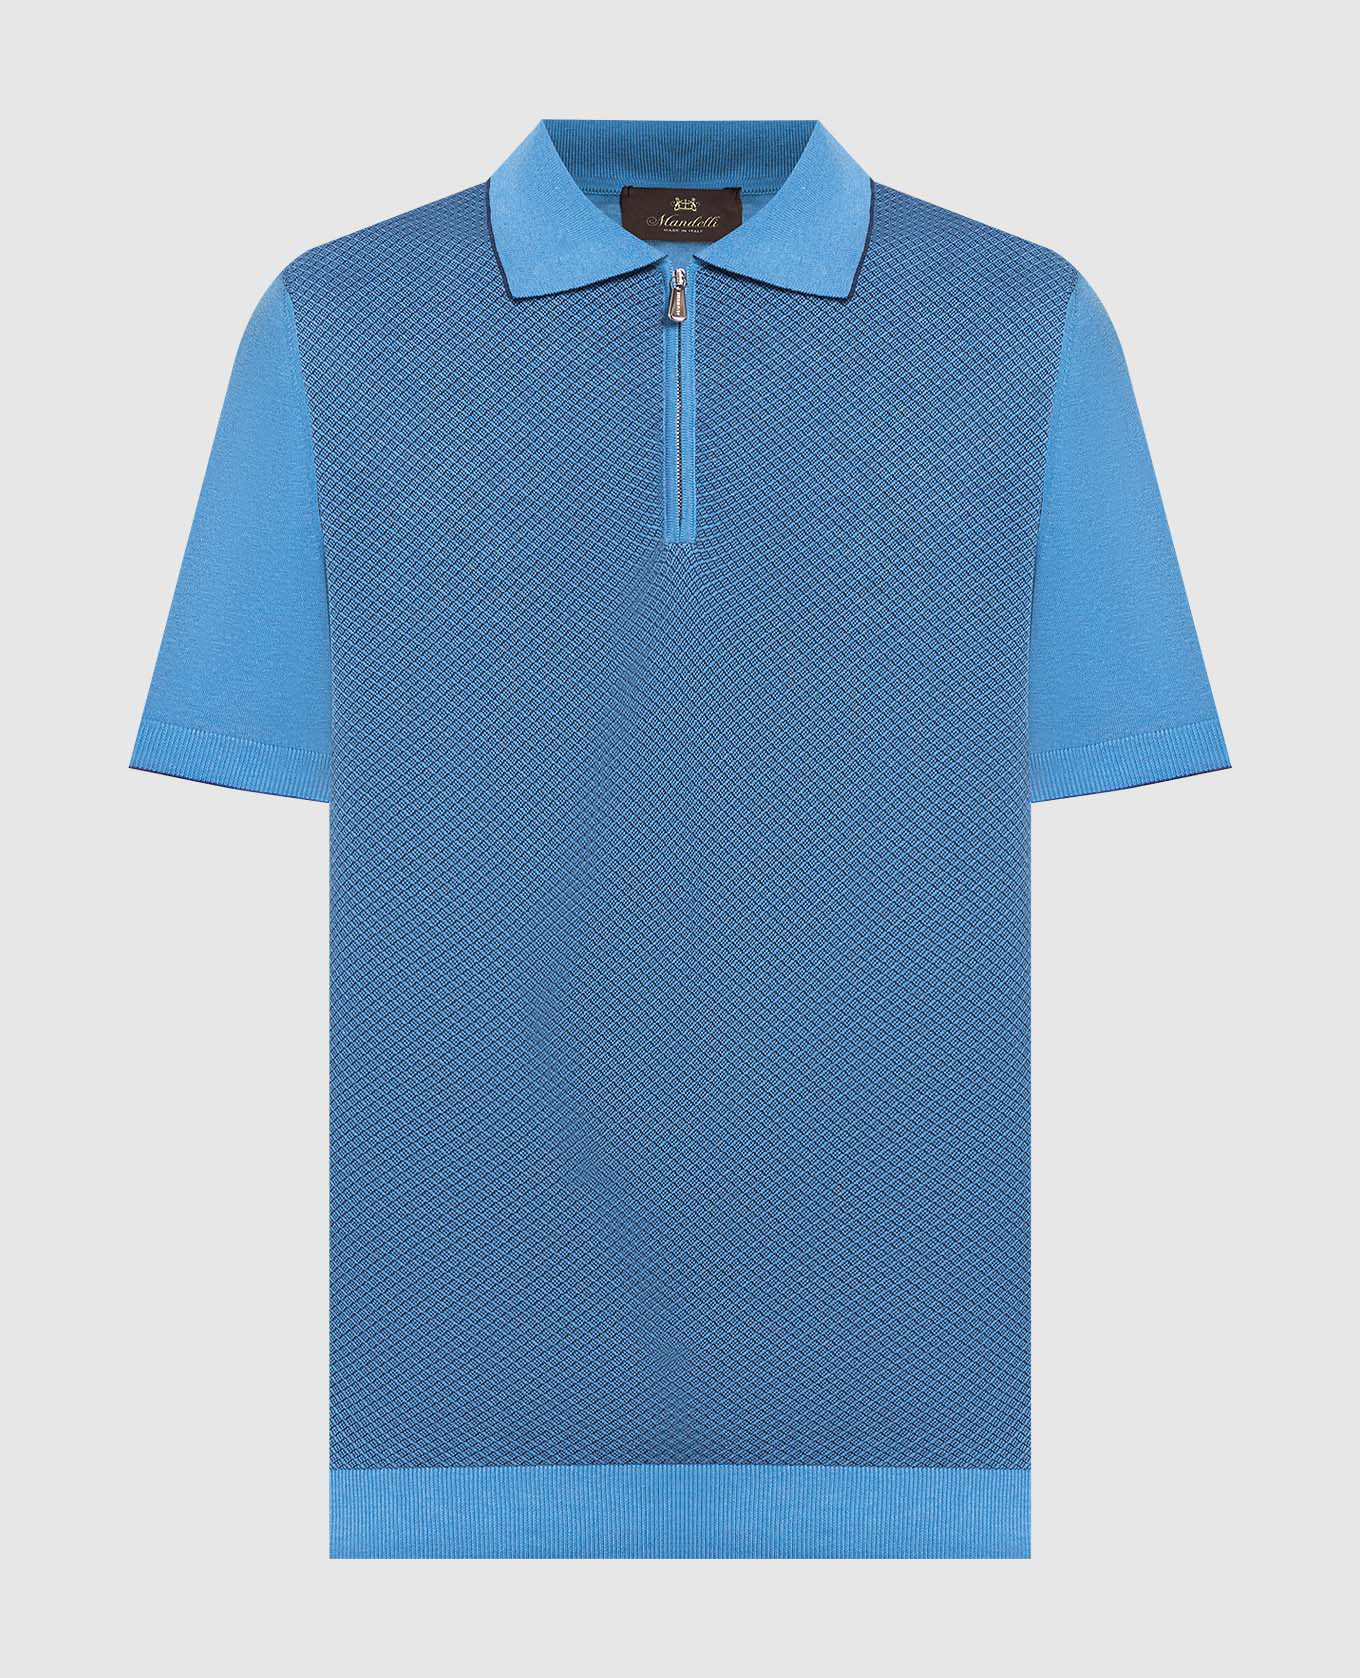 Blue patterned polo shirt